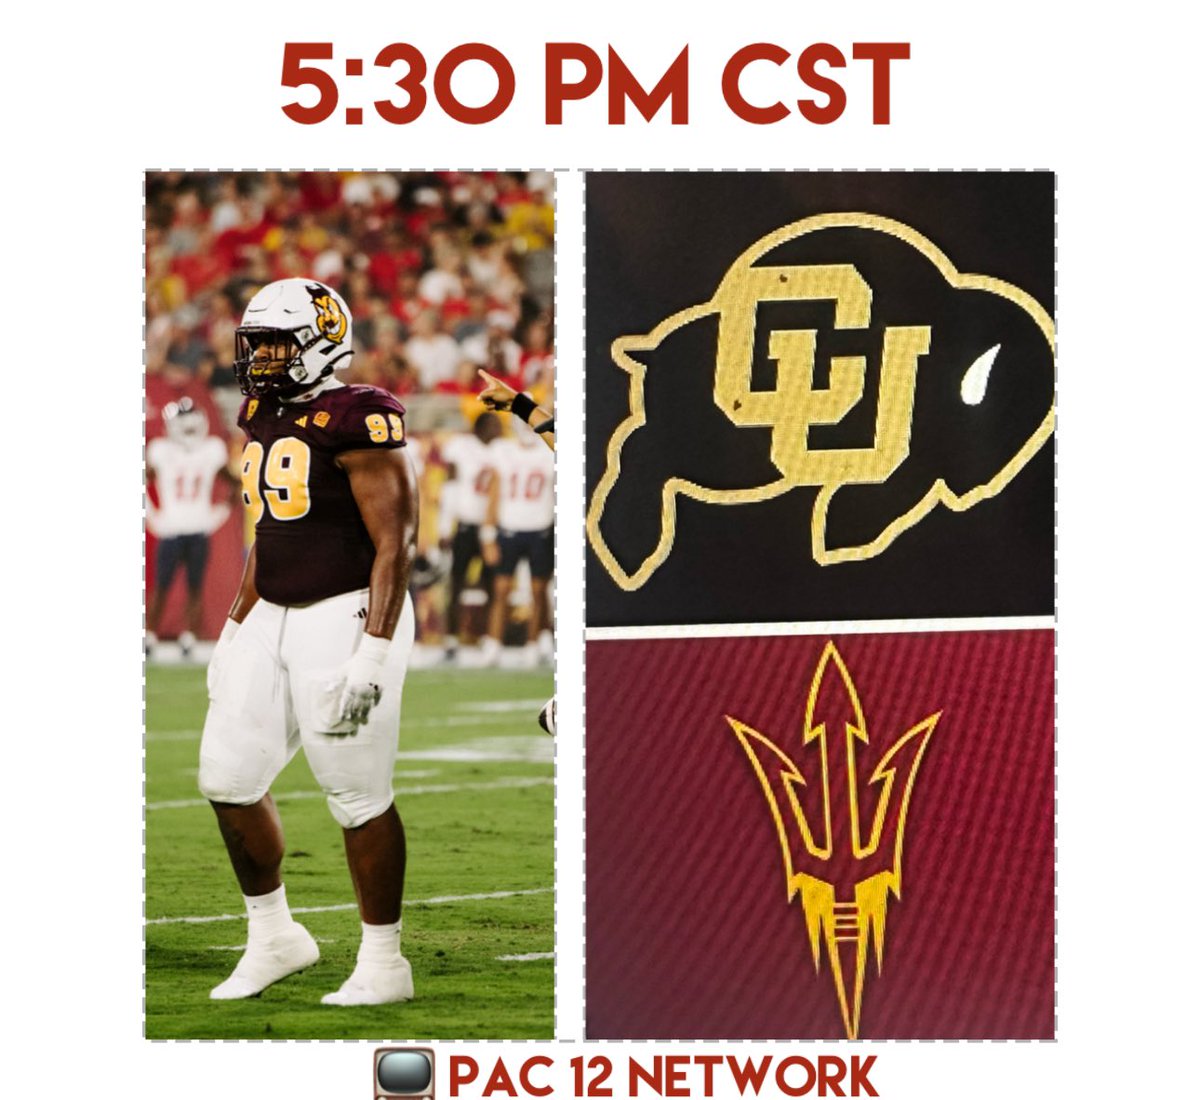 🗣️Buffs vs Sun Devils !!! Grab some popcorn and be 👀 for @FiteCullen #99 from #TatumTx‼️ #TempeTexan #FiteBoyz #DillyvsPrime #THSF @dctf @reaganroy @Commit2theFork @LO_Pac12 @pac12 @BDenny29 @ChrisKarpman @PanolaWatchman @lnjsports @StandBeast @SR_scouting